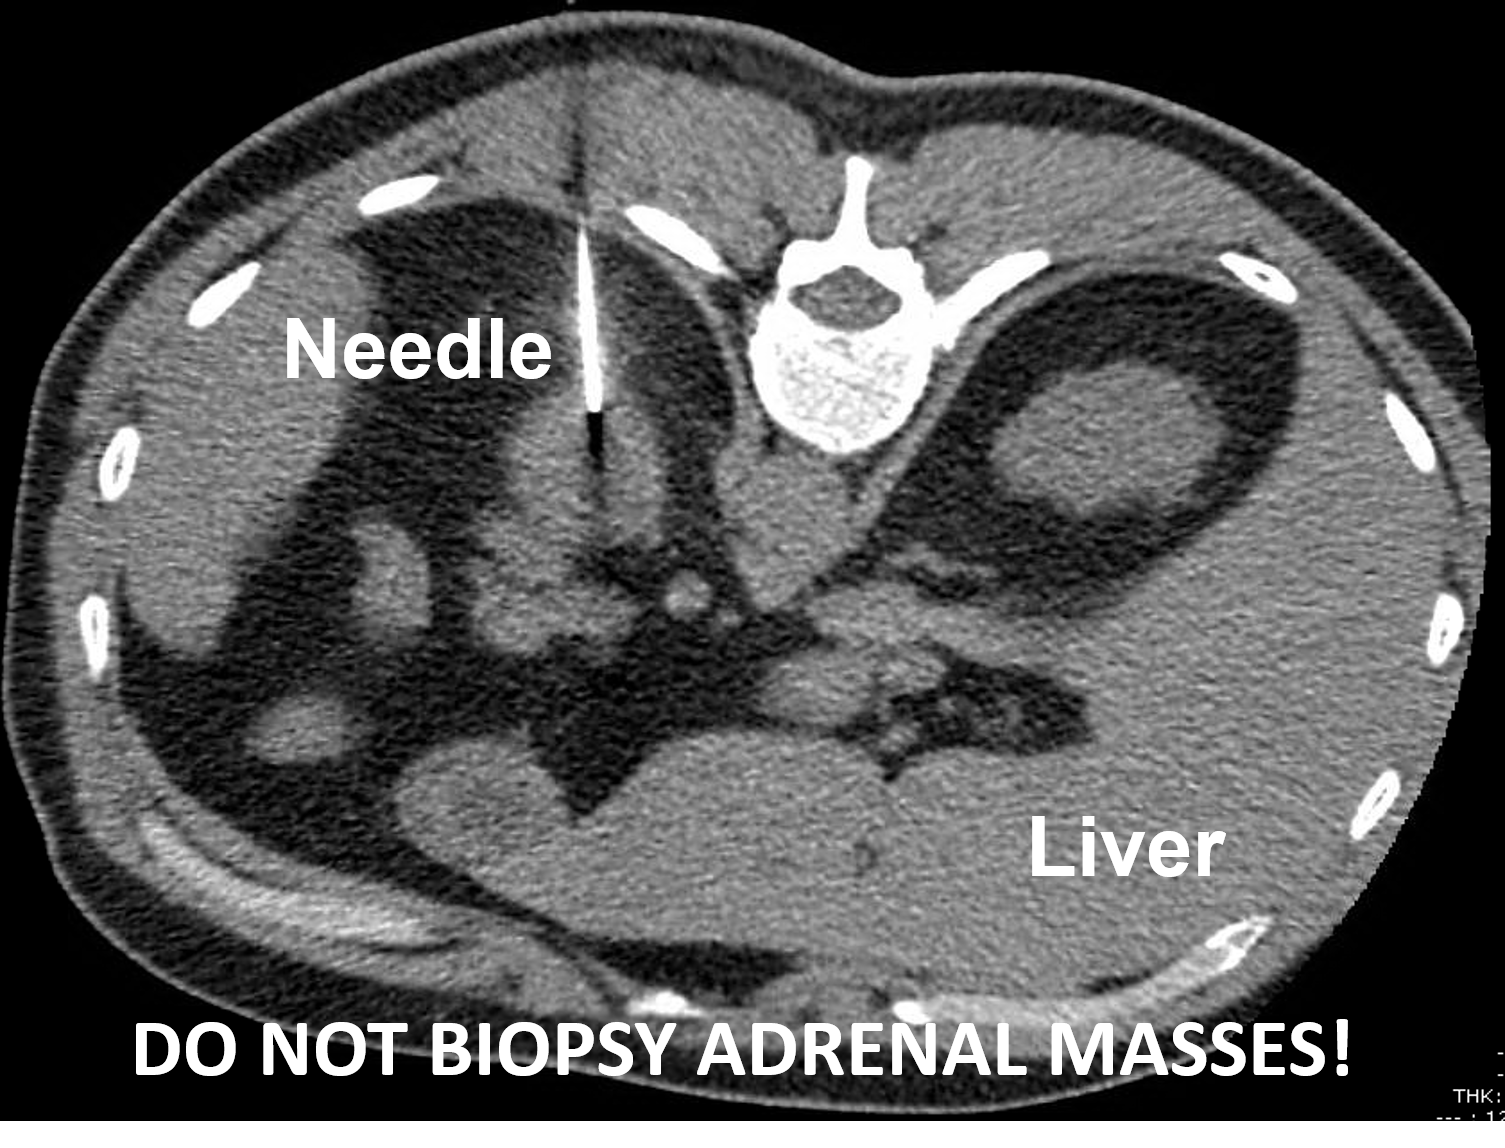 A left adrenocortical cancer undergoing a CT-guided biopsy. This should not be performed. The only time to consider a biopsy of an adrenal tumor is if the patient has another cancer and an adrenal metastasis.